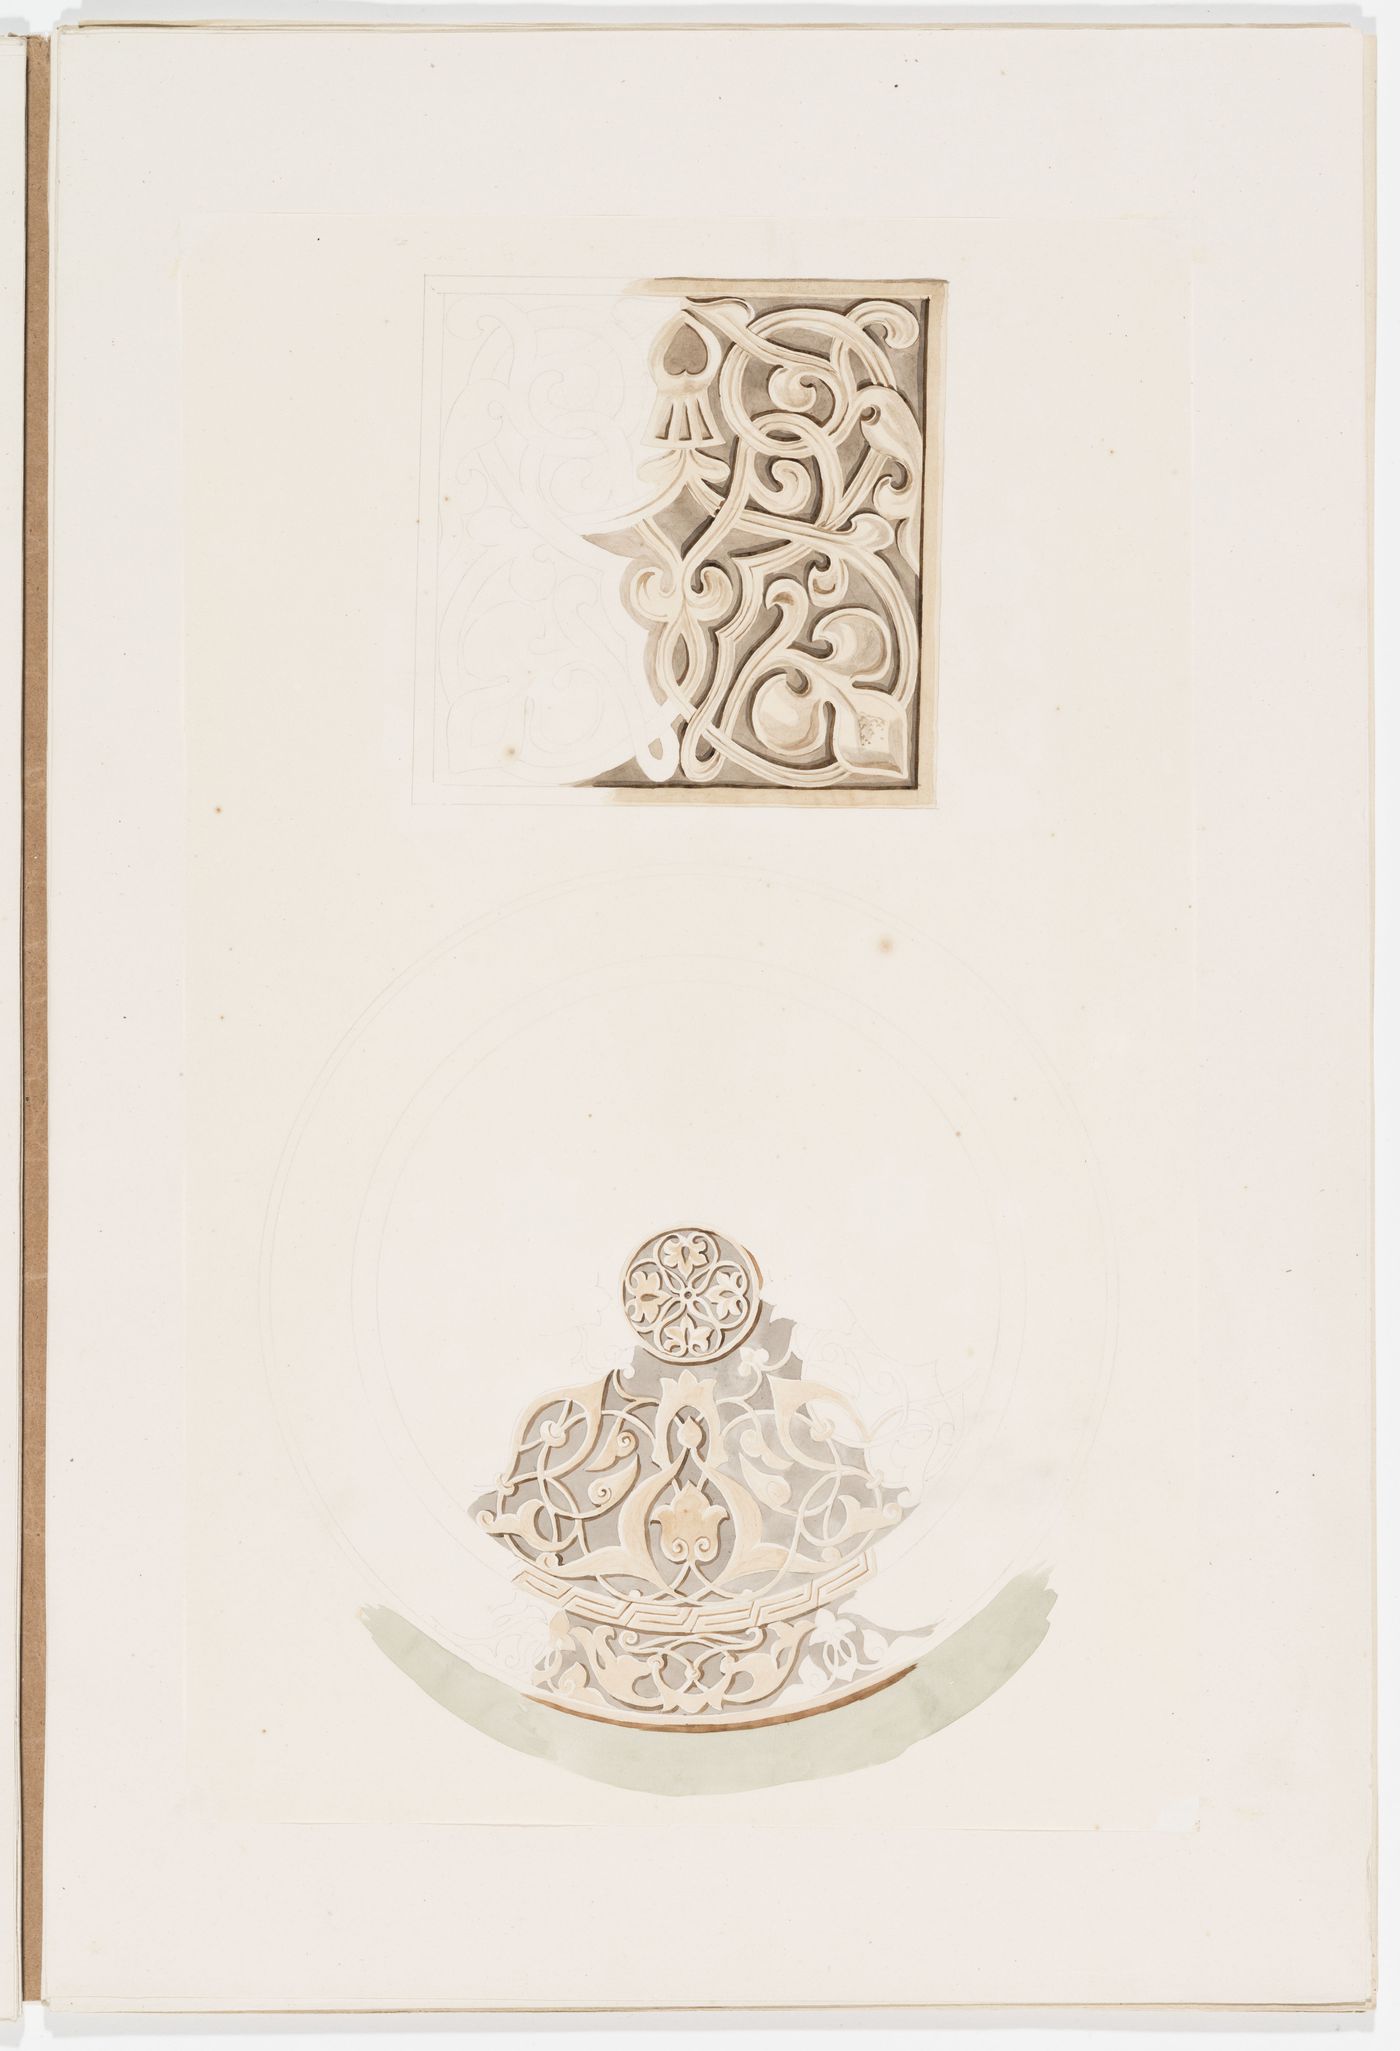 Ornament drawing of two panels decorated with interlacing foliage, probably Islamic